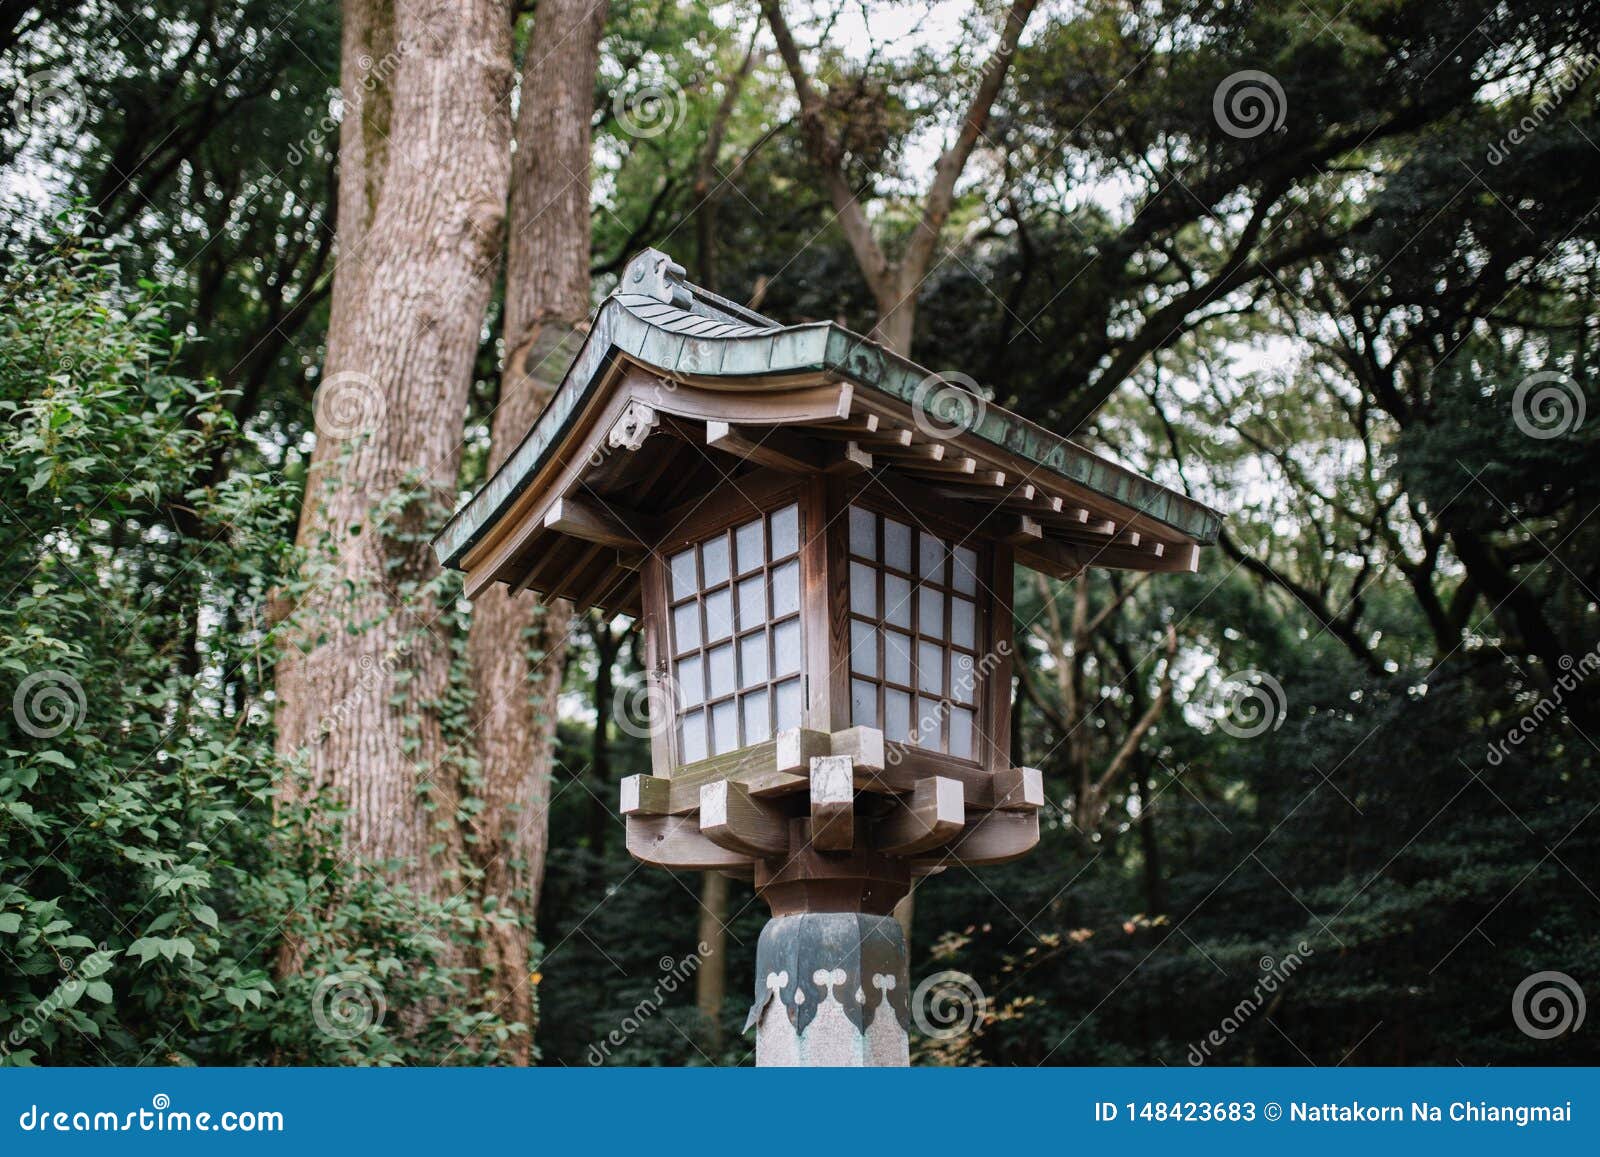 Japanese Style Wooden Lantern with Trees on Background. Stock Image ...